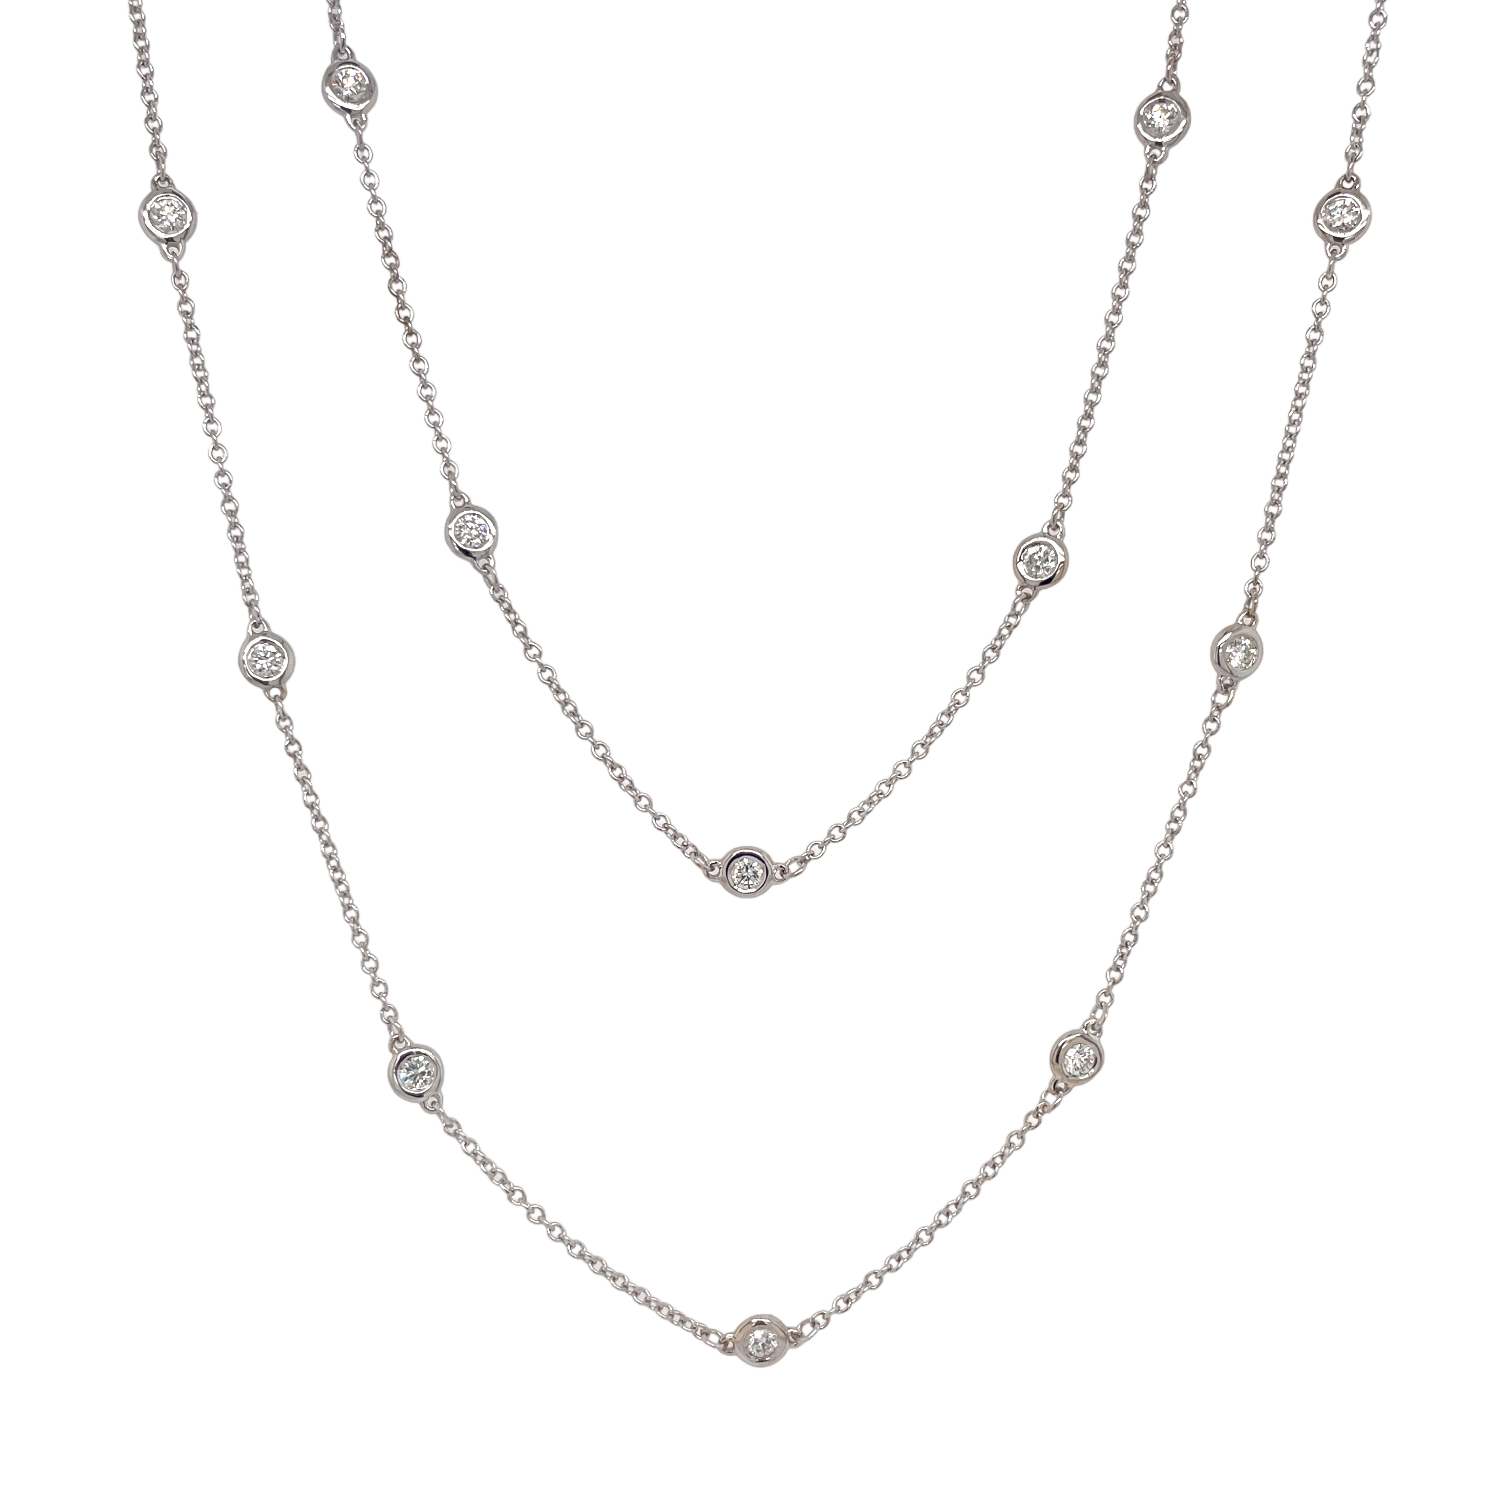 Long Diamond Station Necklace in 14K White Gold